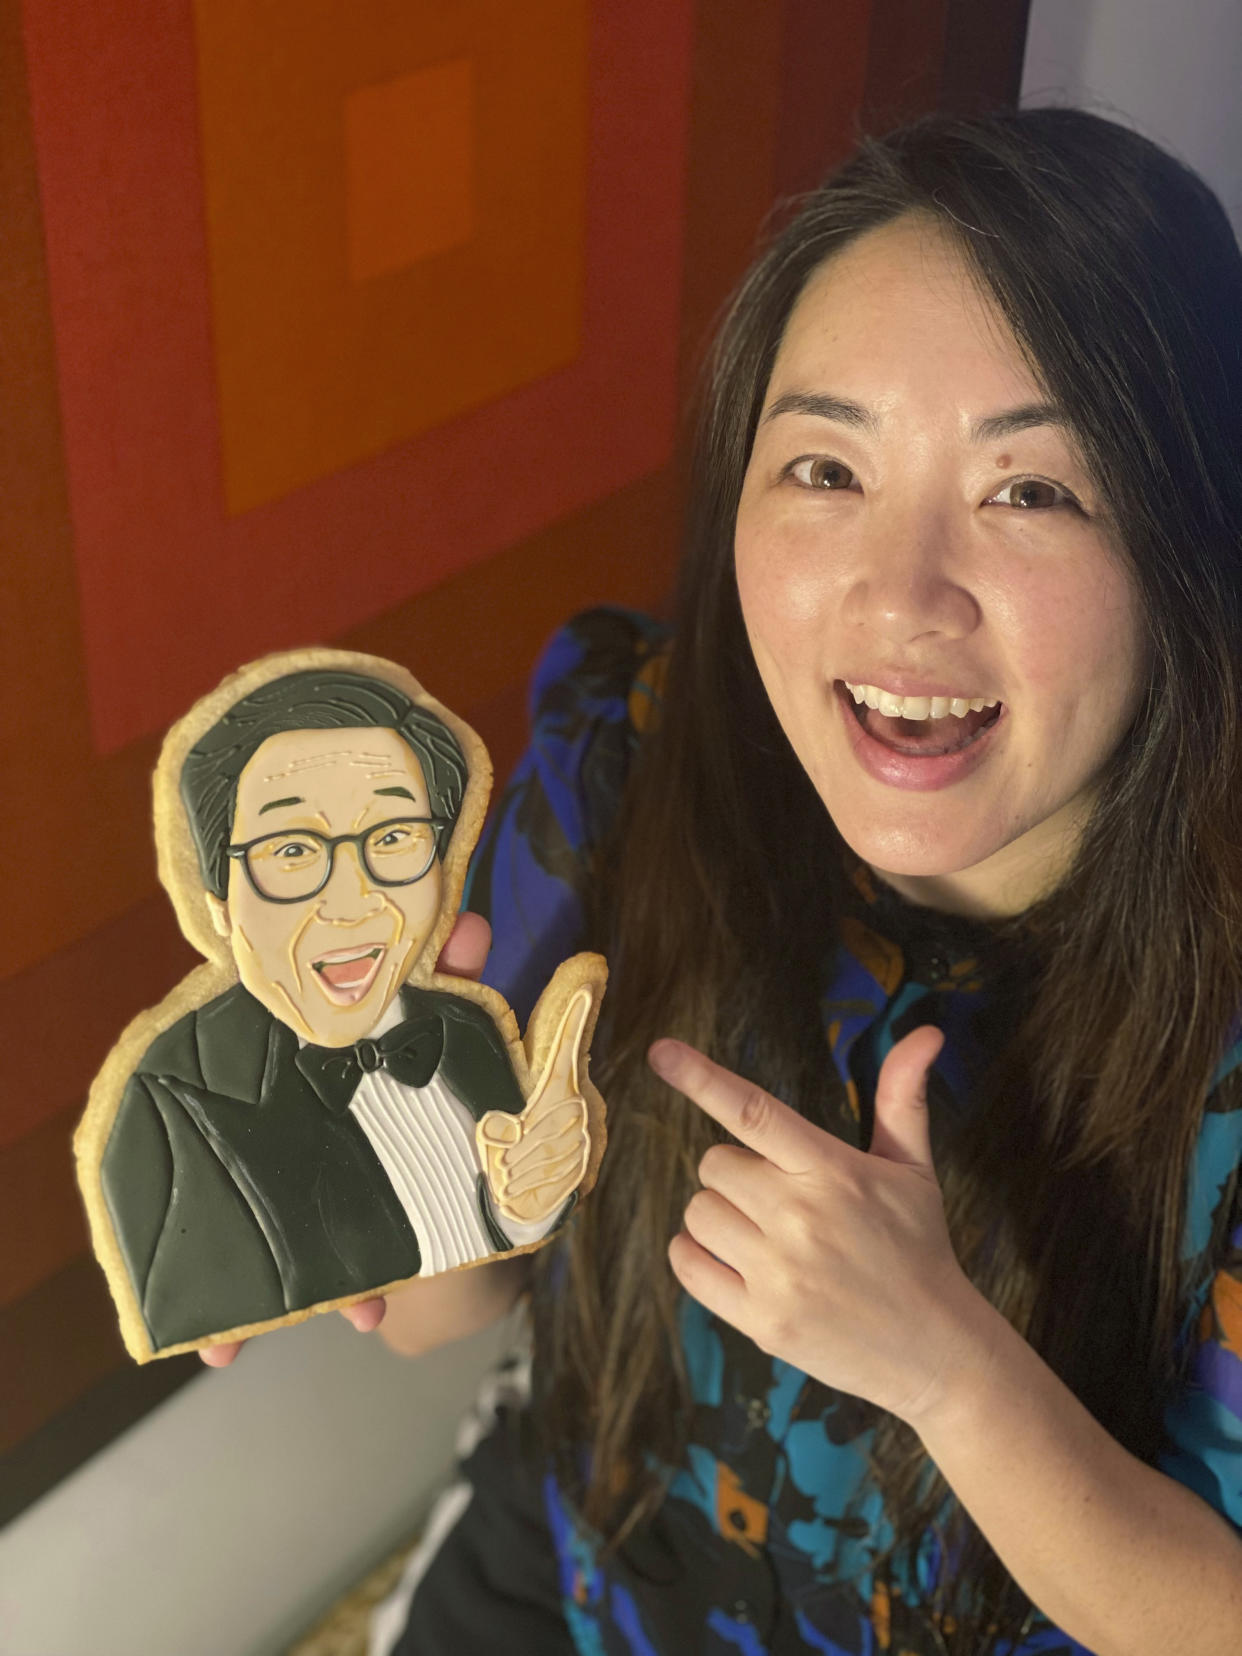 This undated photo provided by Jasmine Cho shows Cho with a cookie portrait of Ke Huy Quan's character from "Everything Everywhere All at Once" made by Cho, a "cookie activist" based in Pittsburgh. Quan's best supporting actor win and comeback story from childhood star of '80s flicks, coupled with Michelle Yeoh's historic win as the first Asian best actress winner ever had viewers of Asian descent shedding tears of happiness — and grinning. The "Everything Everywhere All at Once" co-stars bring the total number of Asians who have earned acting Oscars to just six in the awards' 95-year history. (Jasmine Cho via AP)